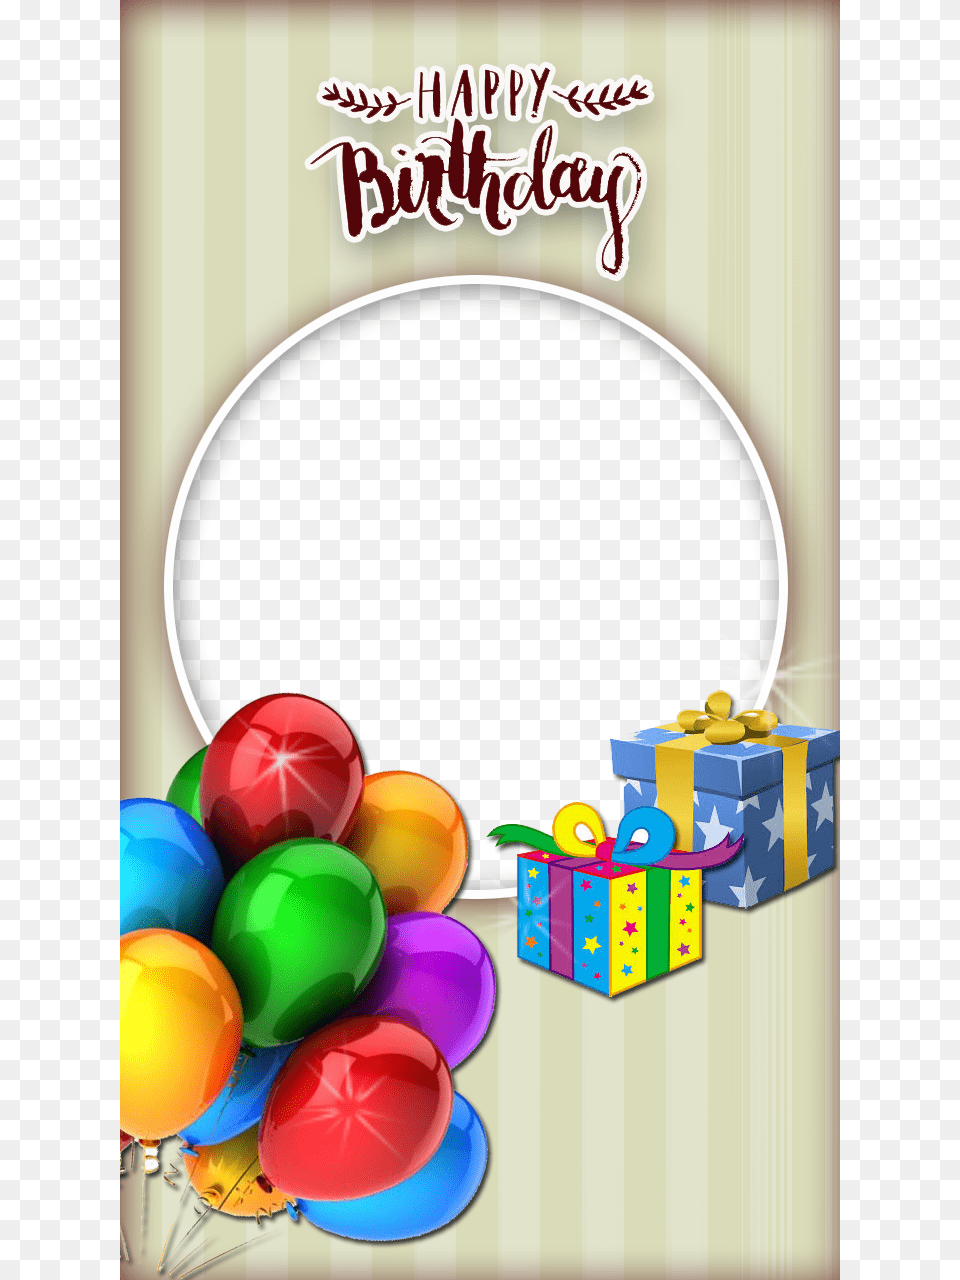 Awesome Birthday Frame Happy Birthday Wishes With Photo Frame, Balloon, Sphere Png Image